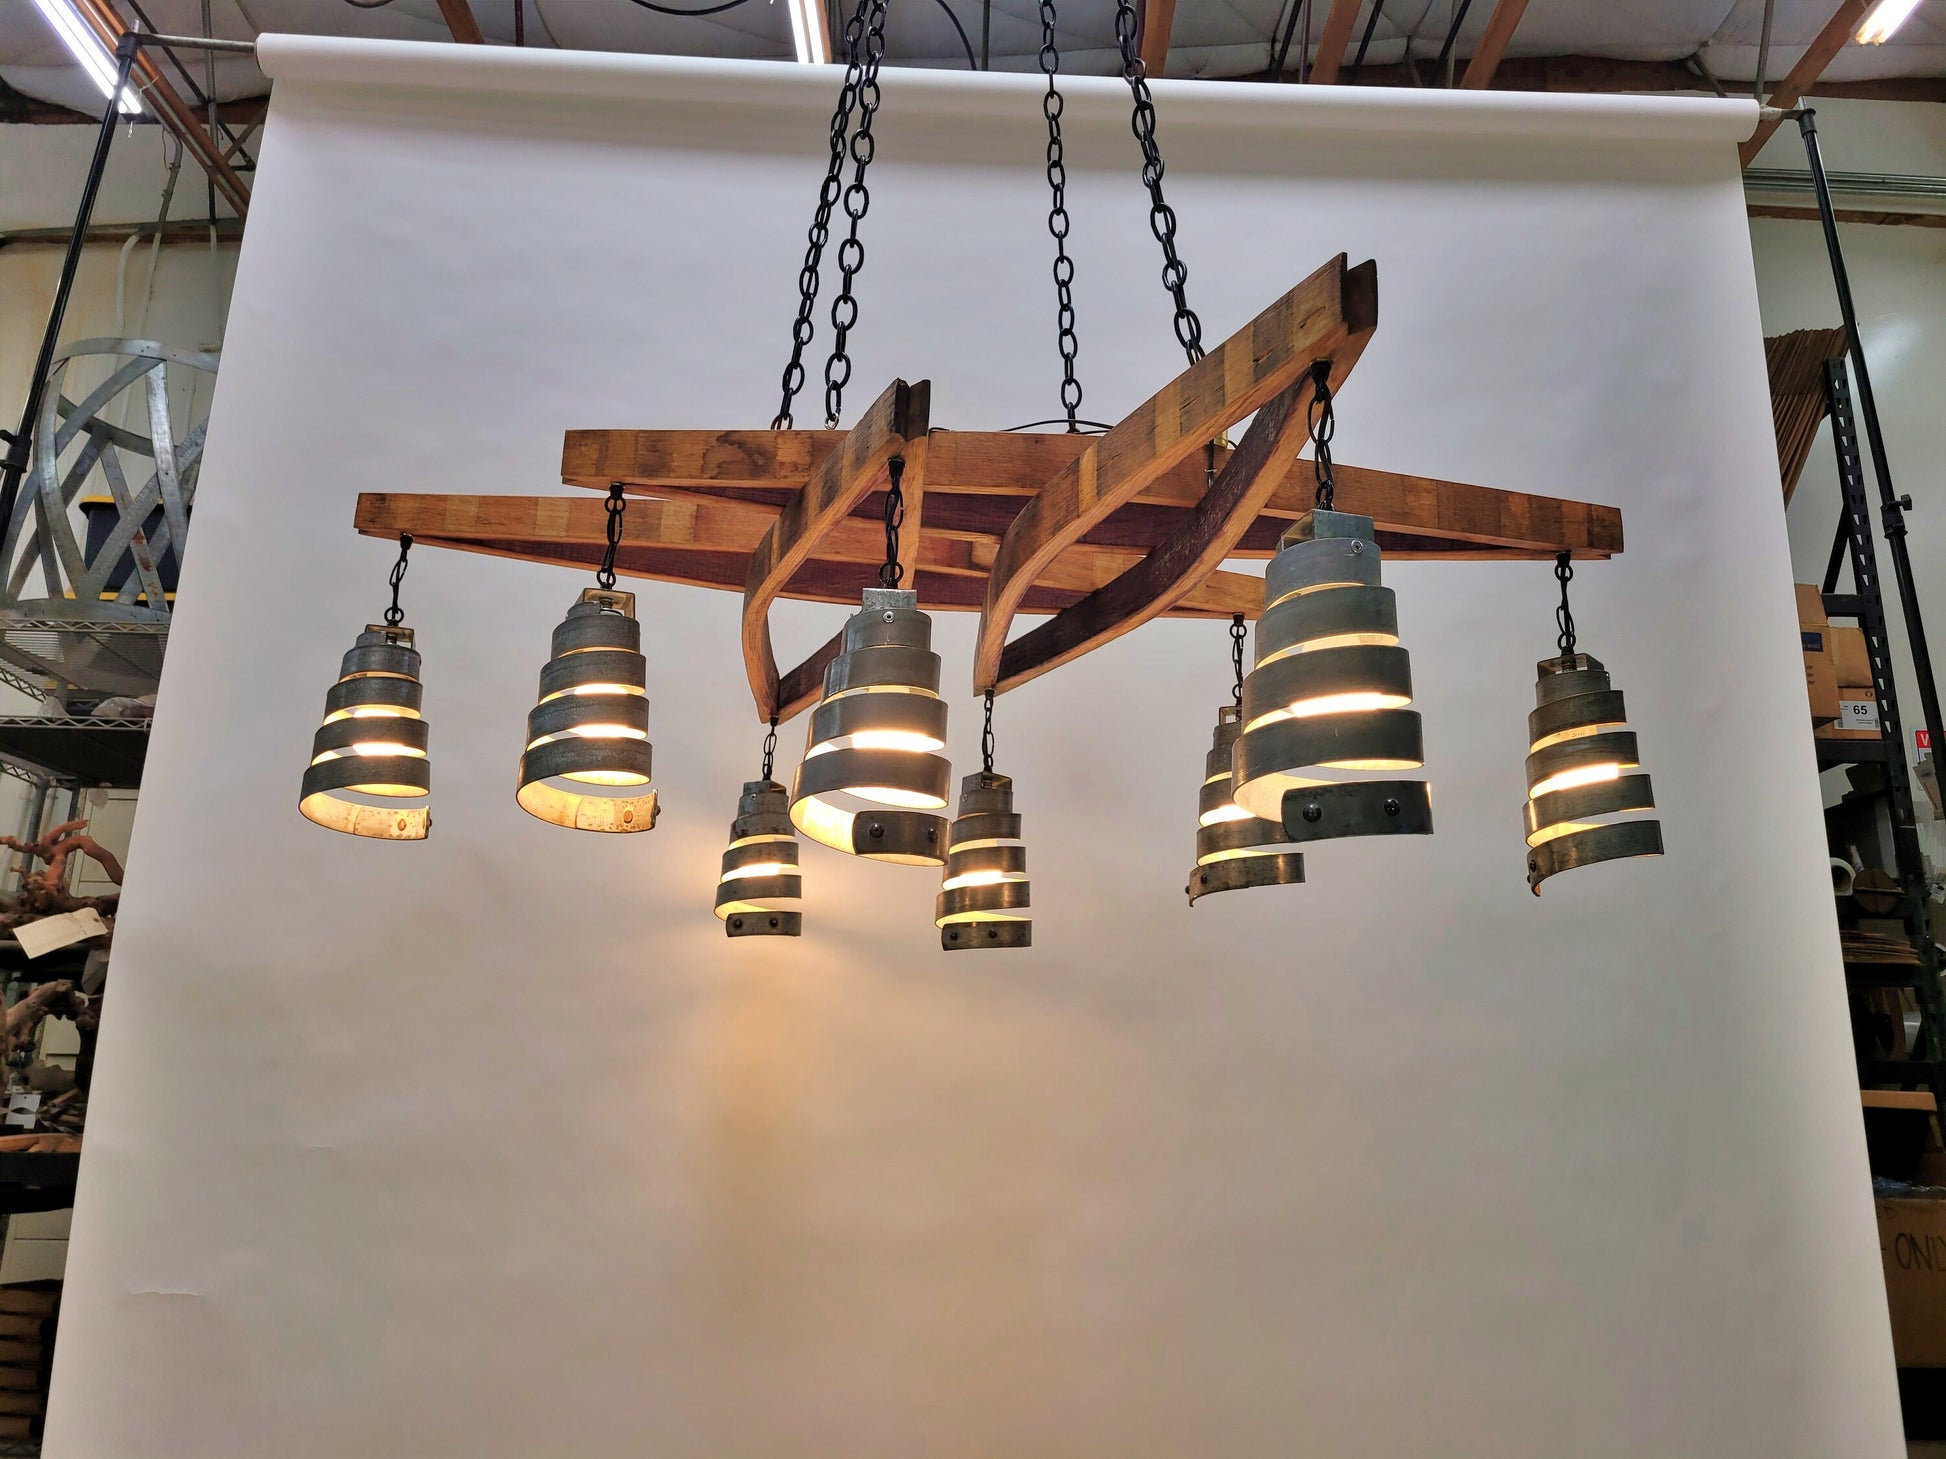 Wine Barrel Stave Chandelier - Cutat - Made from retired California Wine Barrels + Rings - 100% Recycled!